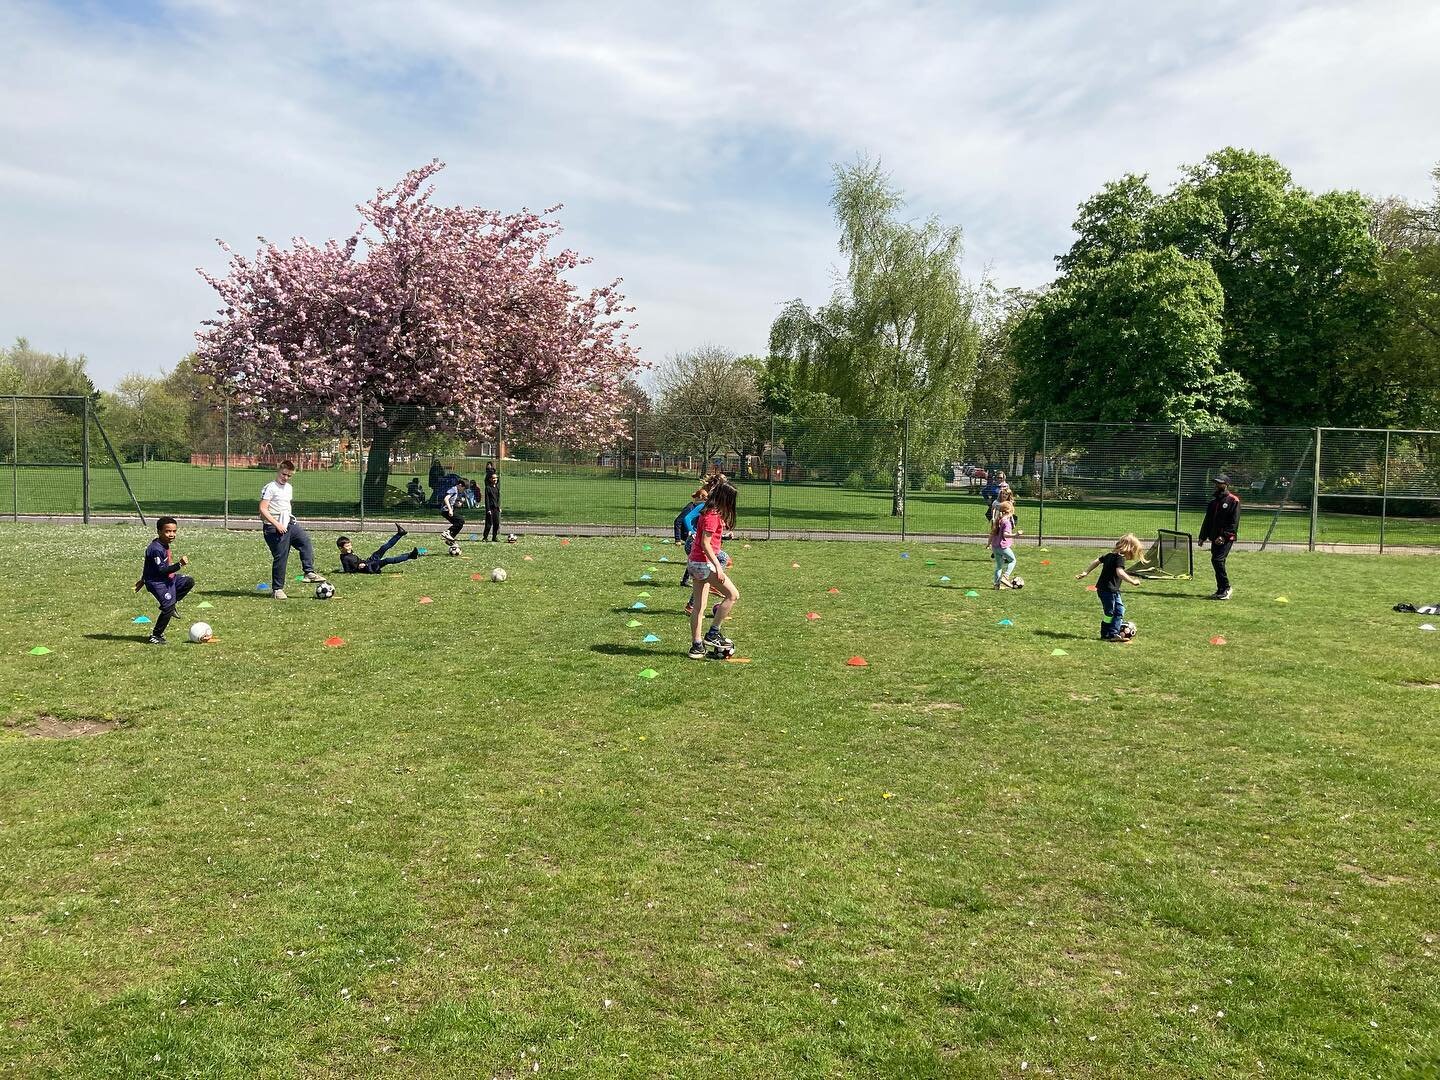 Great session out in the sun yesterday for our home ed group lots of skills and competition,but most of all big smiles while we had fun!😁😁

For more info visit www.footballfunatics.co.uk 

#FootballFUNatics #Football #Fun #HomeEducation #Group #Ses